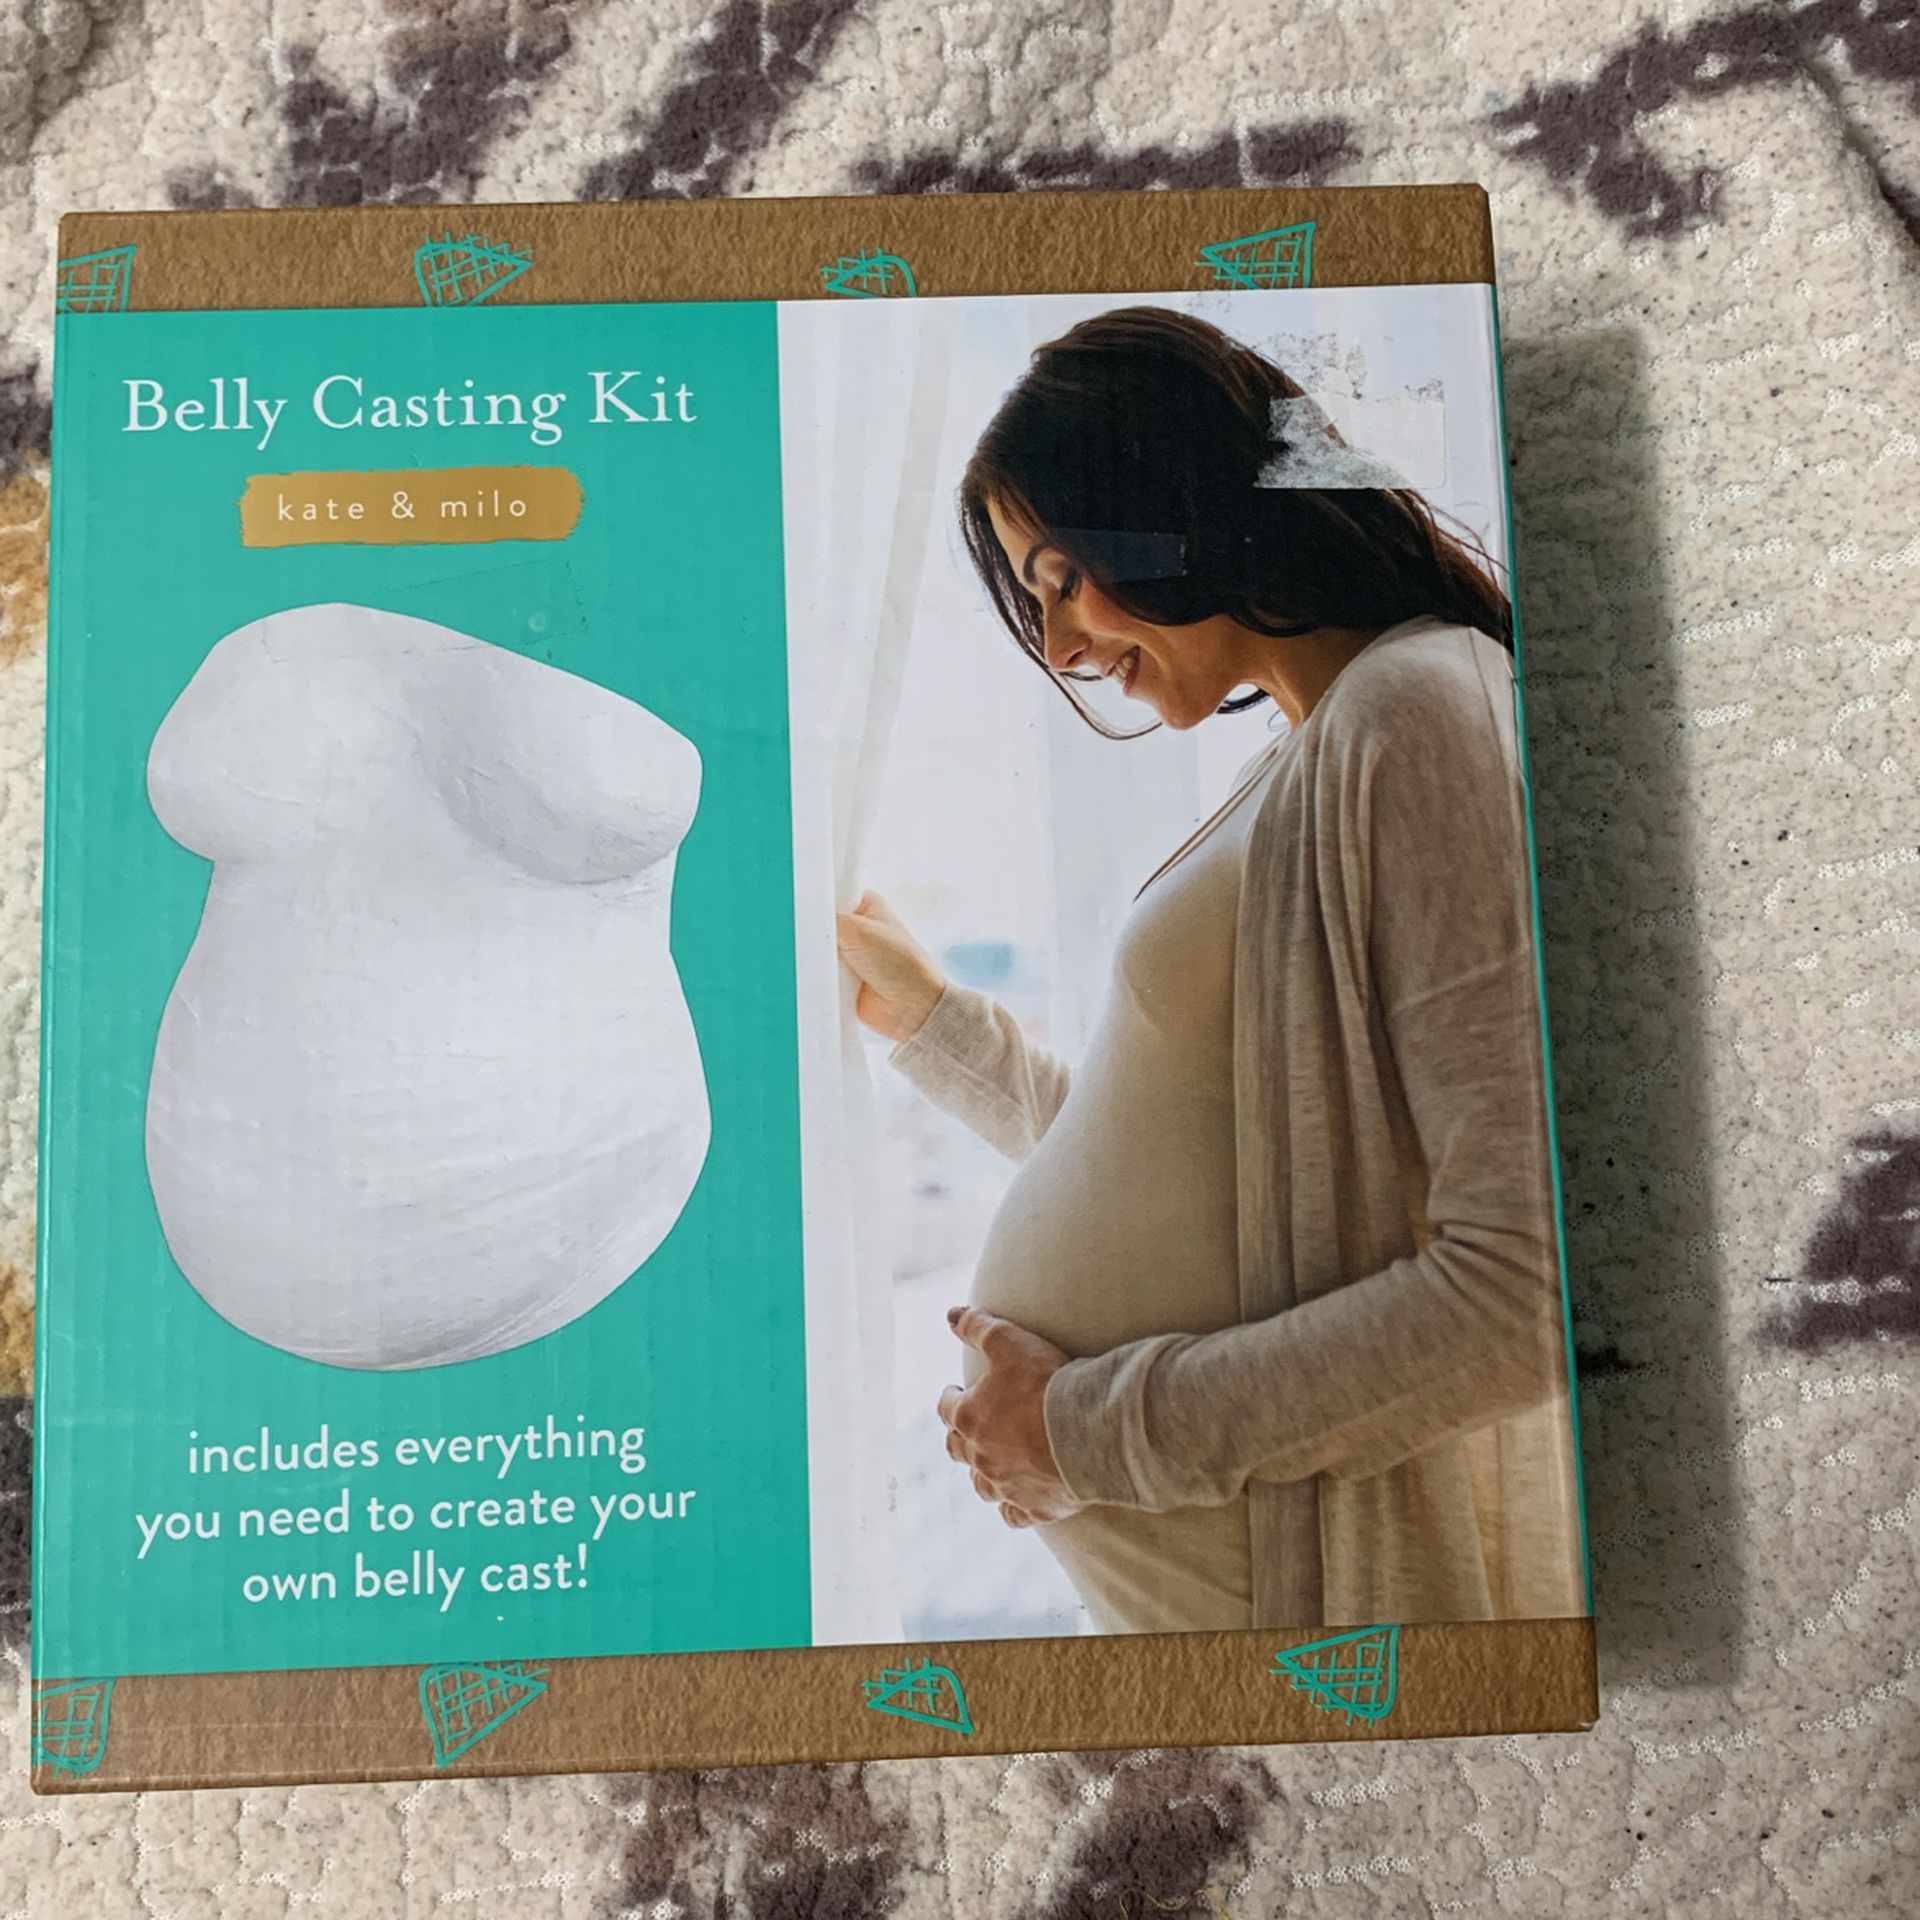 Belly Casting Kit for Sale in Bell Gardens, CA - OfferUp